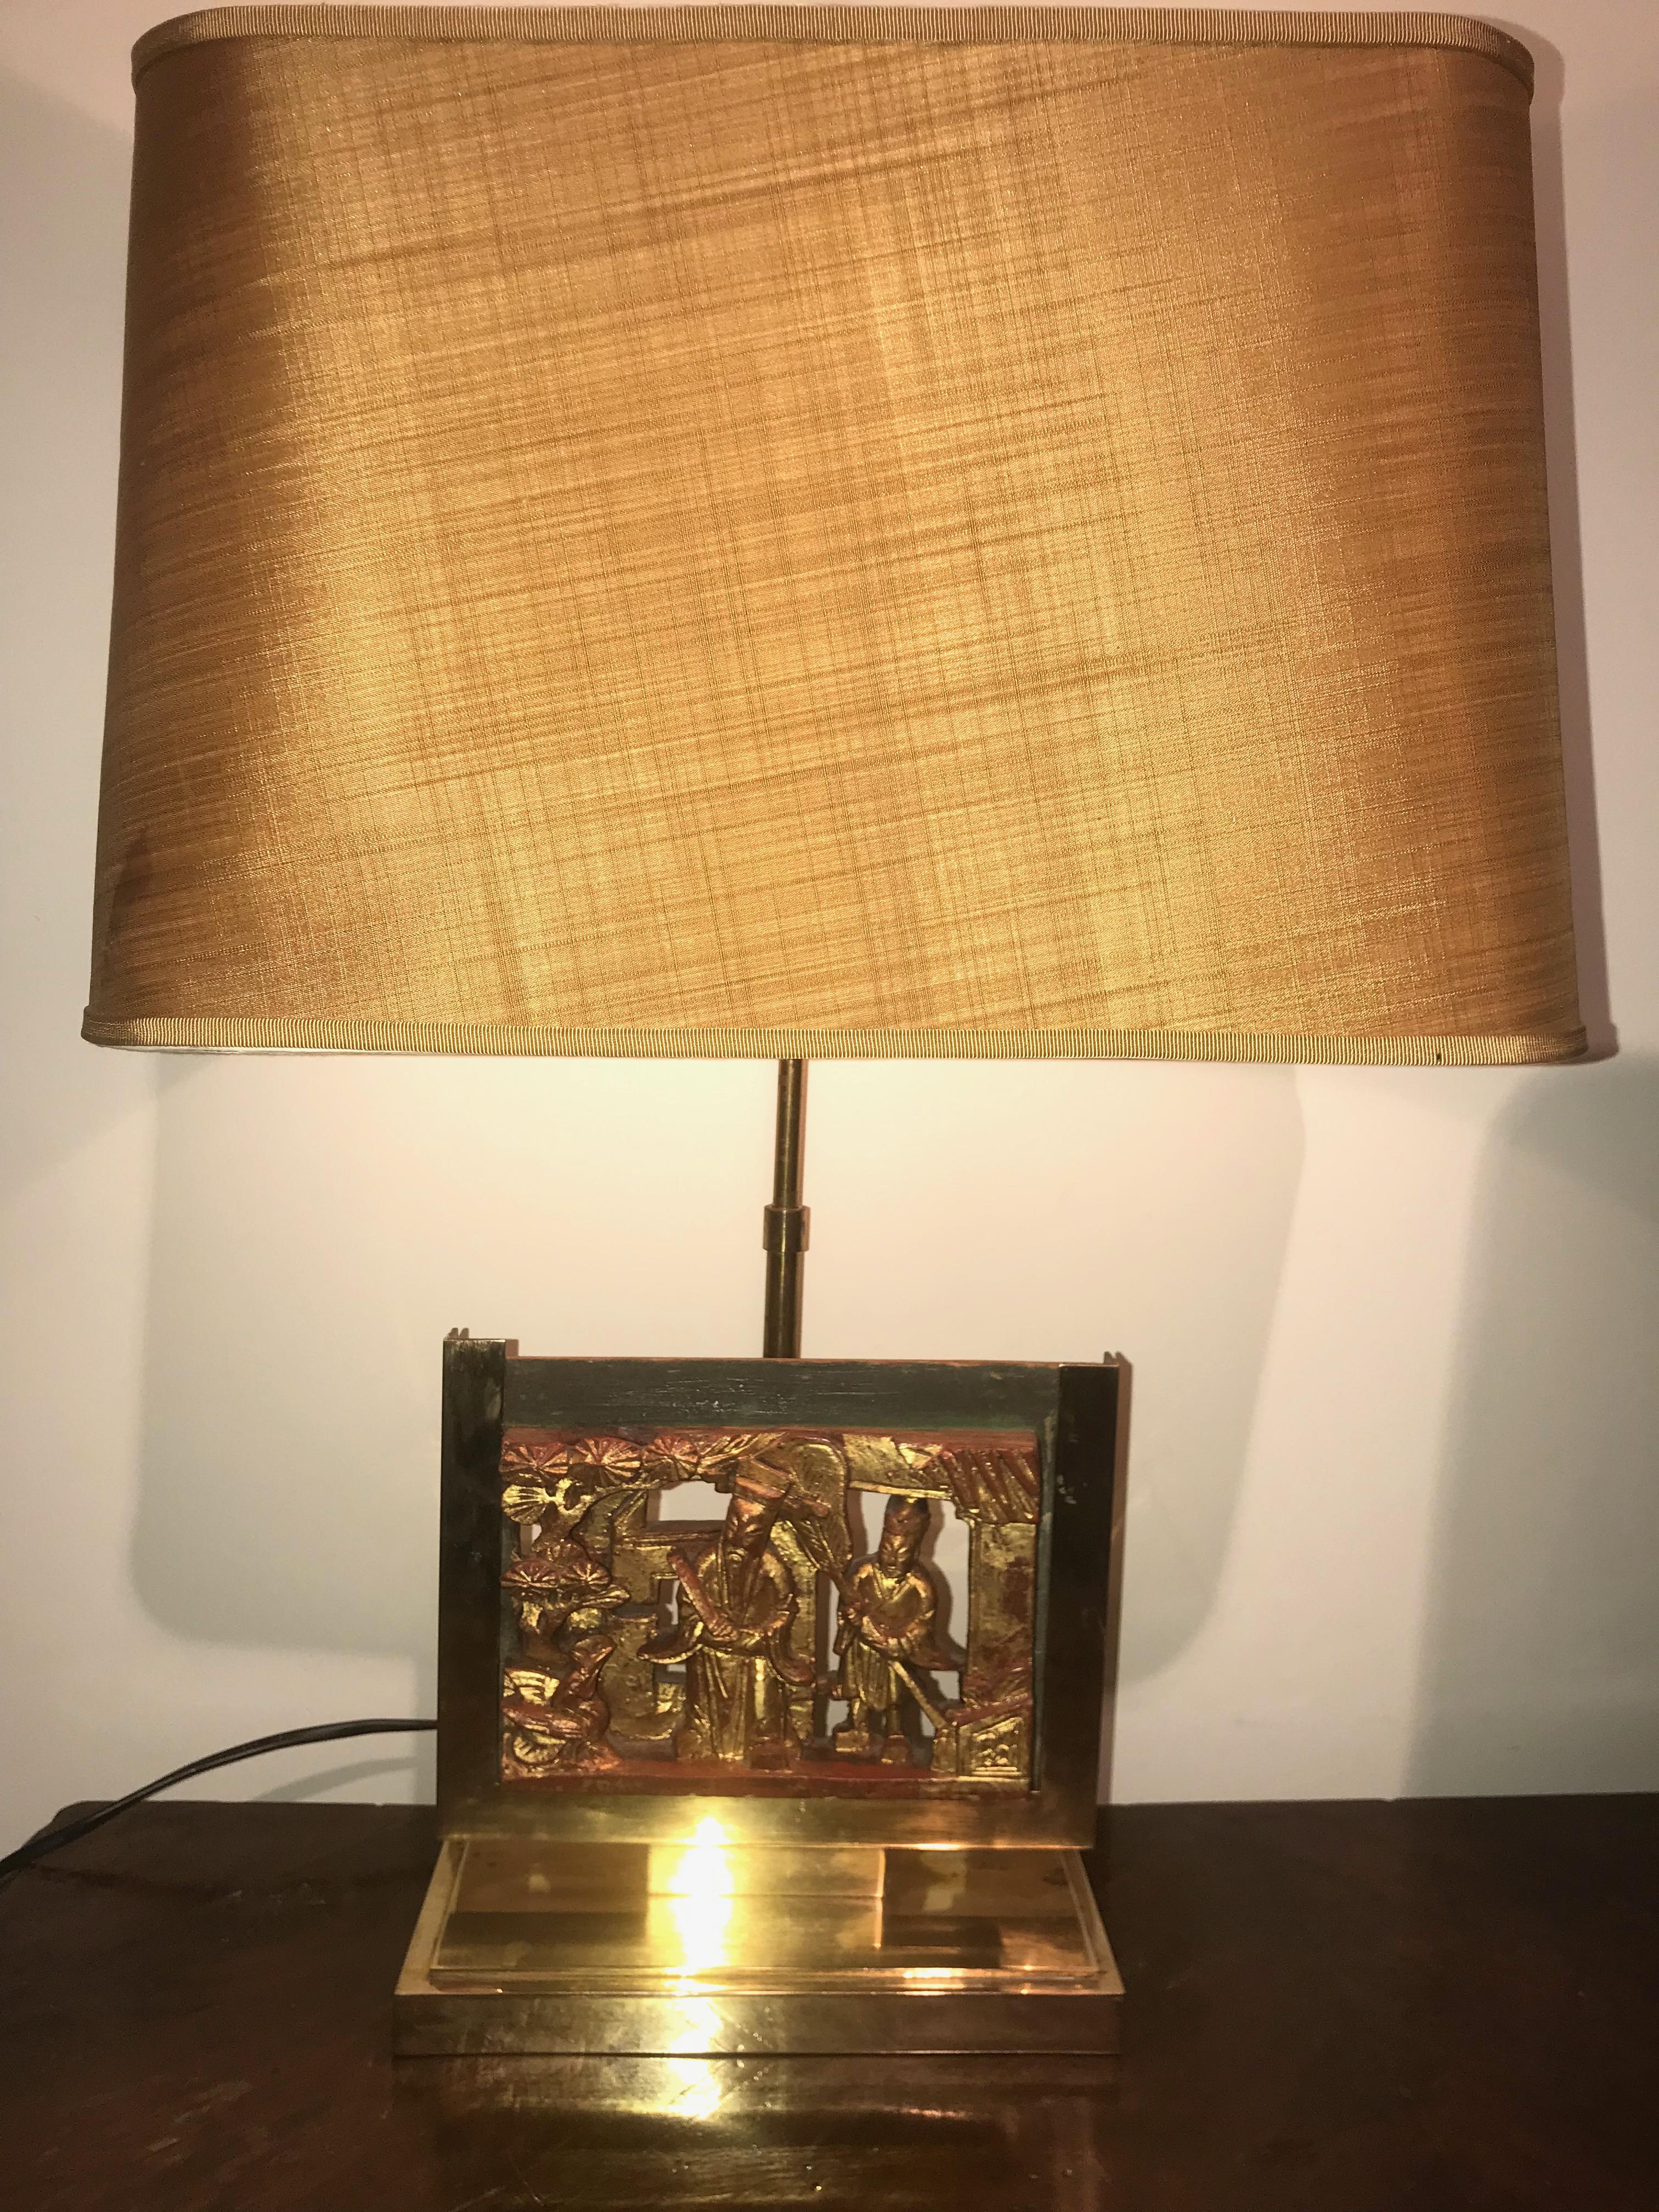 Pair of Midcentury Mod Brass Lamps with 19th Century Chinese Carved Wood Panels (Handgeschnitzt)